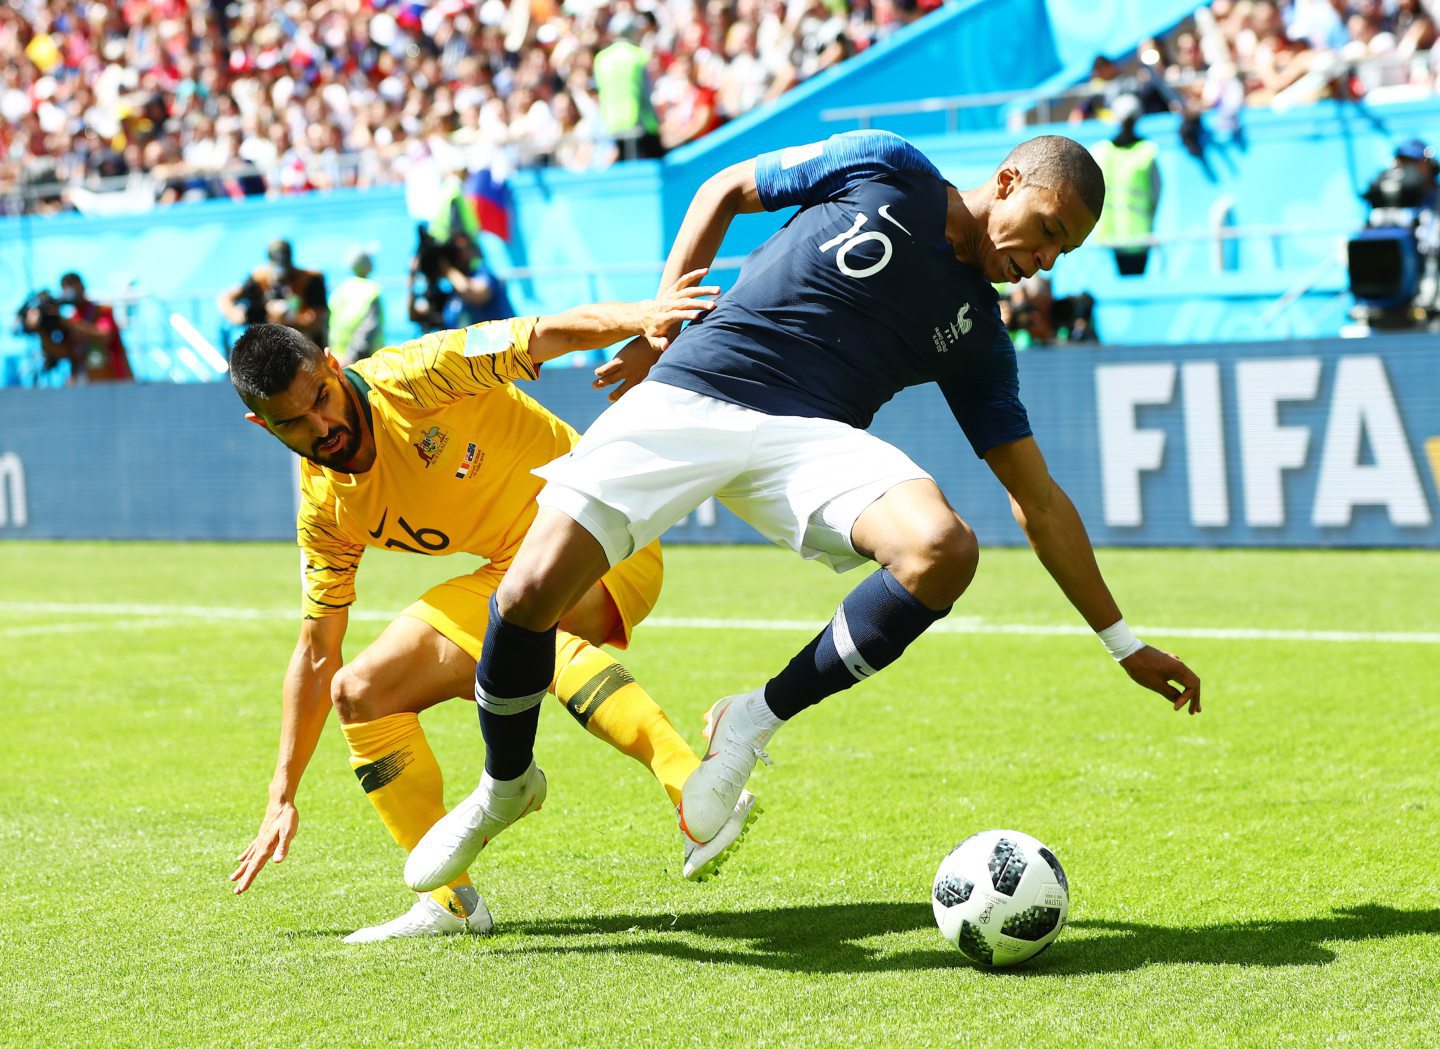 Aziz Behich in action for Australia against Kylian Mbappe of France at the 2018 World Cup in Russia. Image: Shutterstock.